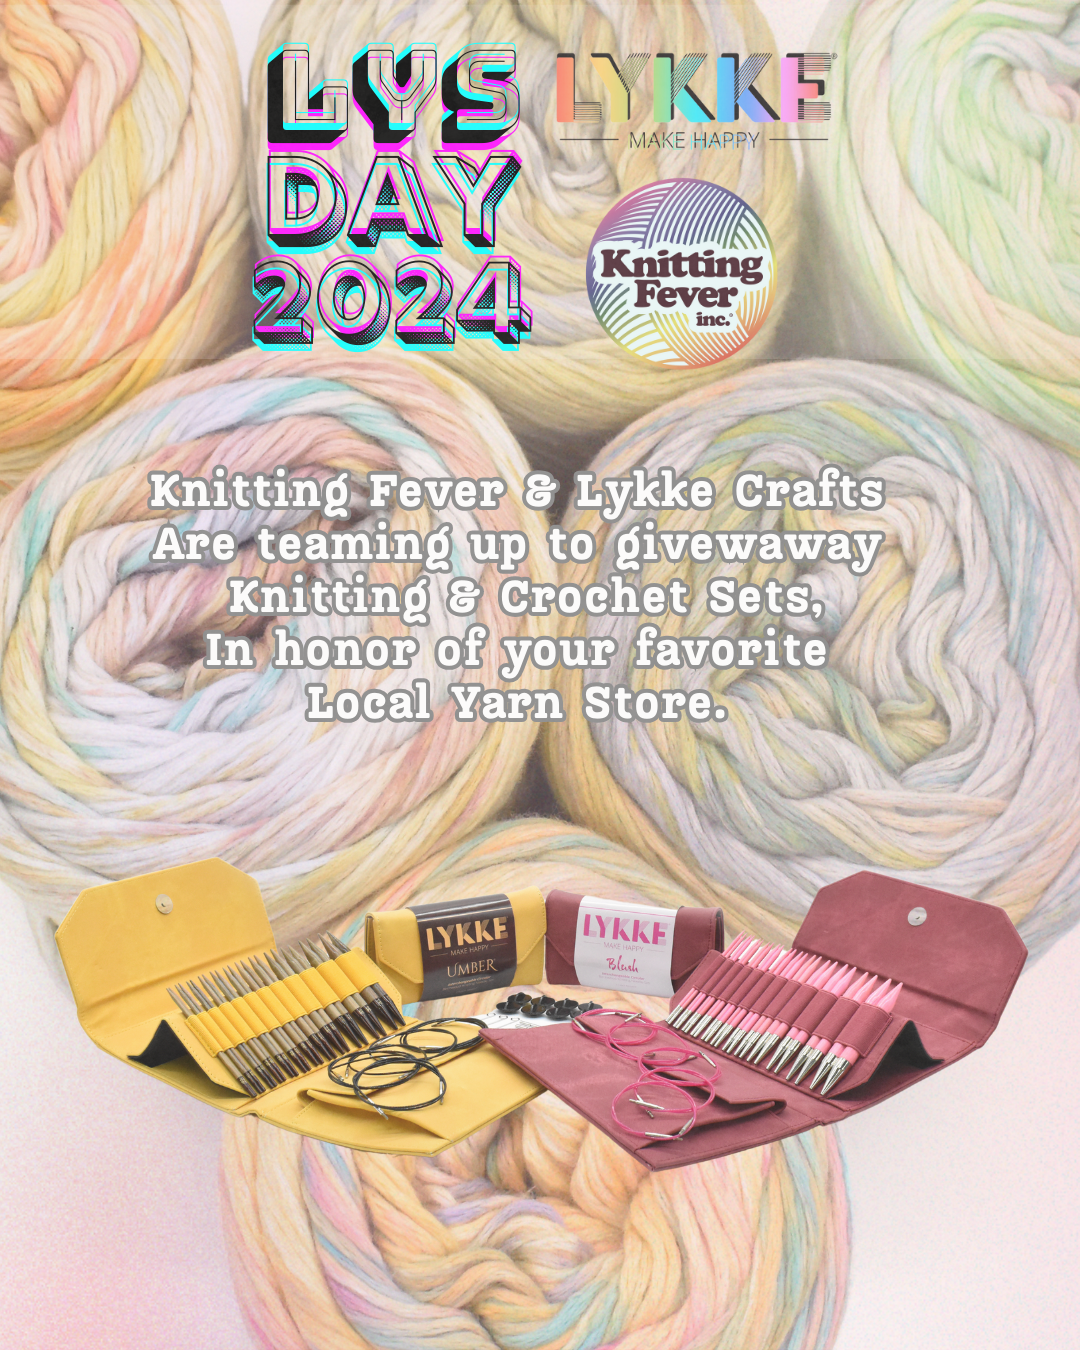 Knitting Fever LYS Day drawing